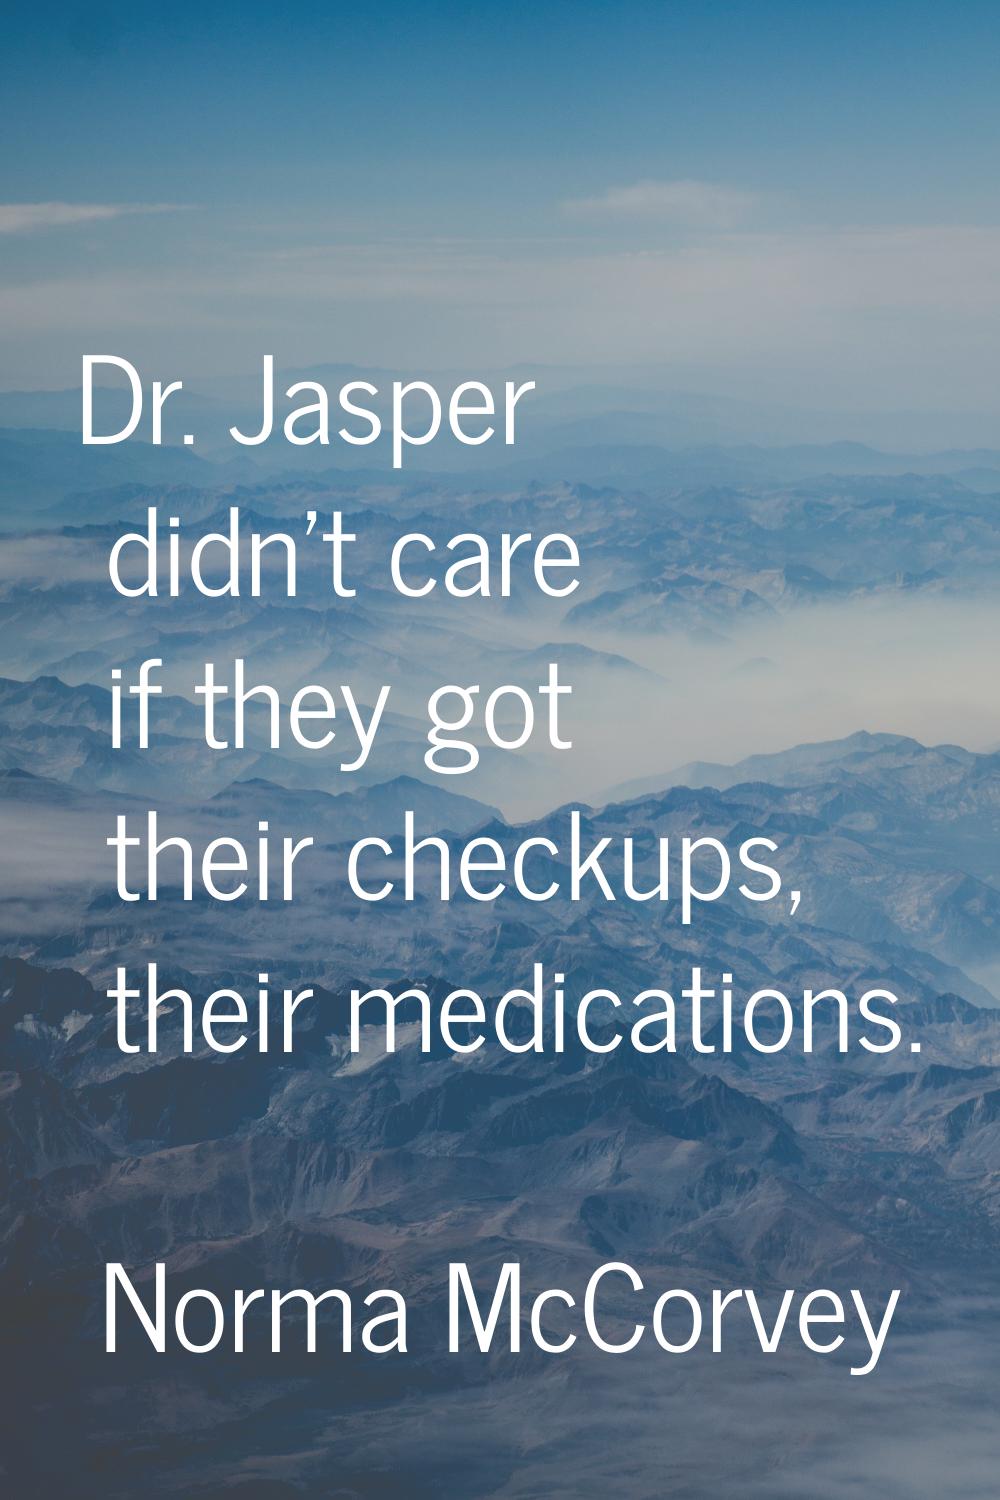 Dr. Jasper didn't care if they got their checkups, their medications.